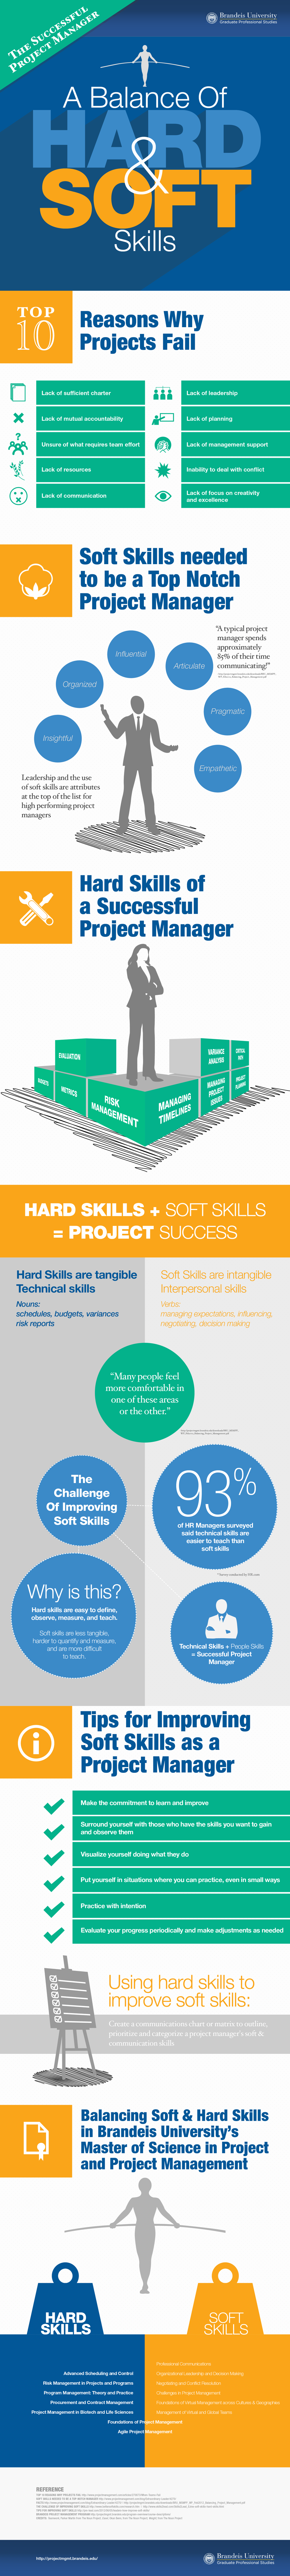 Successful project management balances hard and soft skills (infographic)